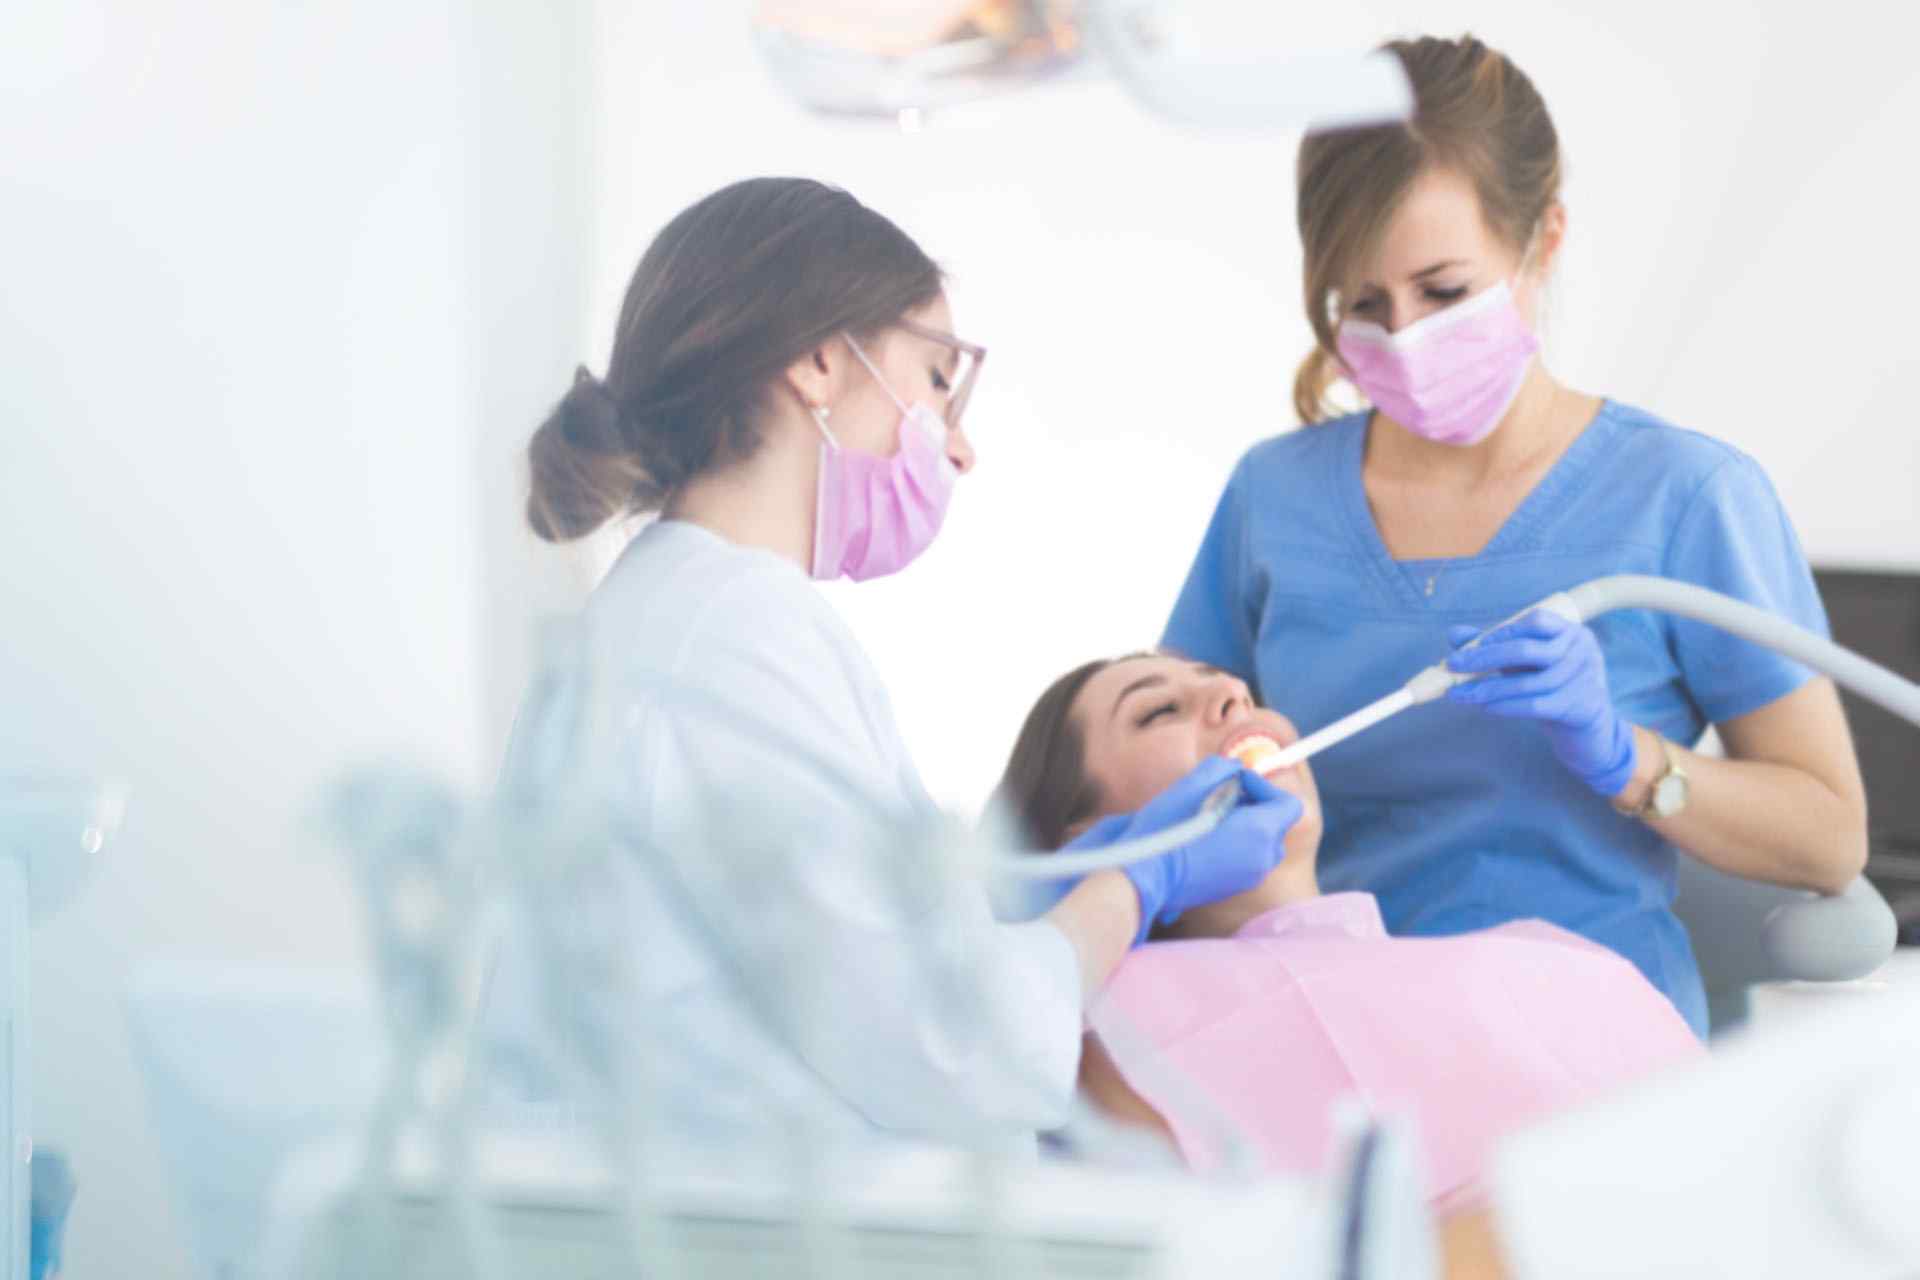 https://united-dentists.com/wp-content/uploads/2020/02/about_us_background.jpg